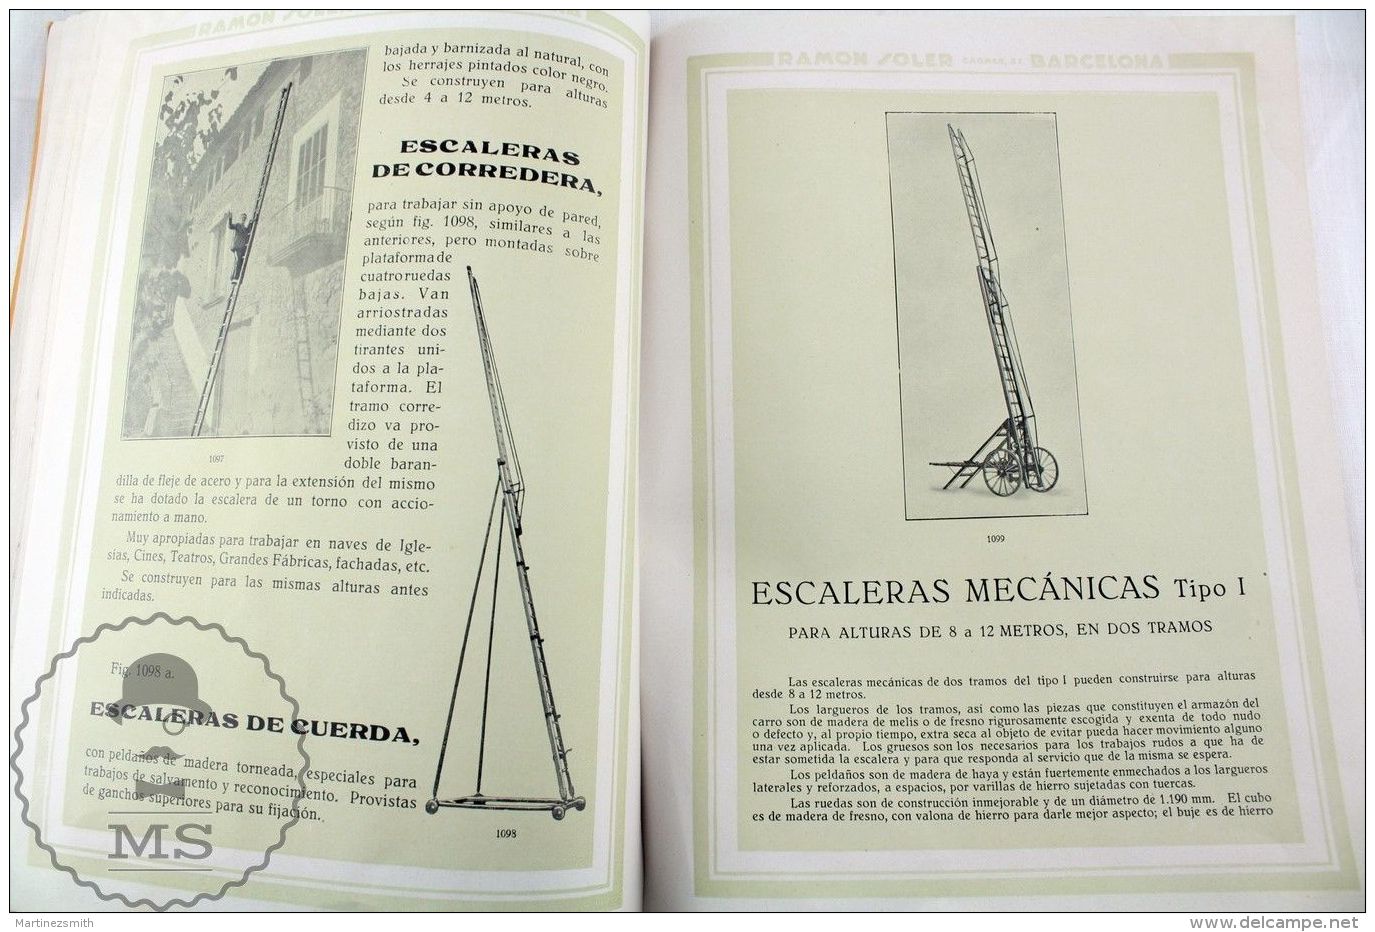 Antique 1920´s Spanish Fireman/ Firefighter Tools and Equipment Catalogue